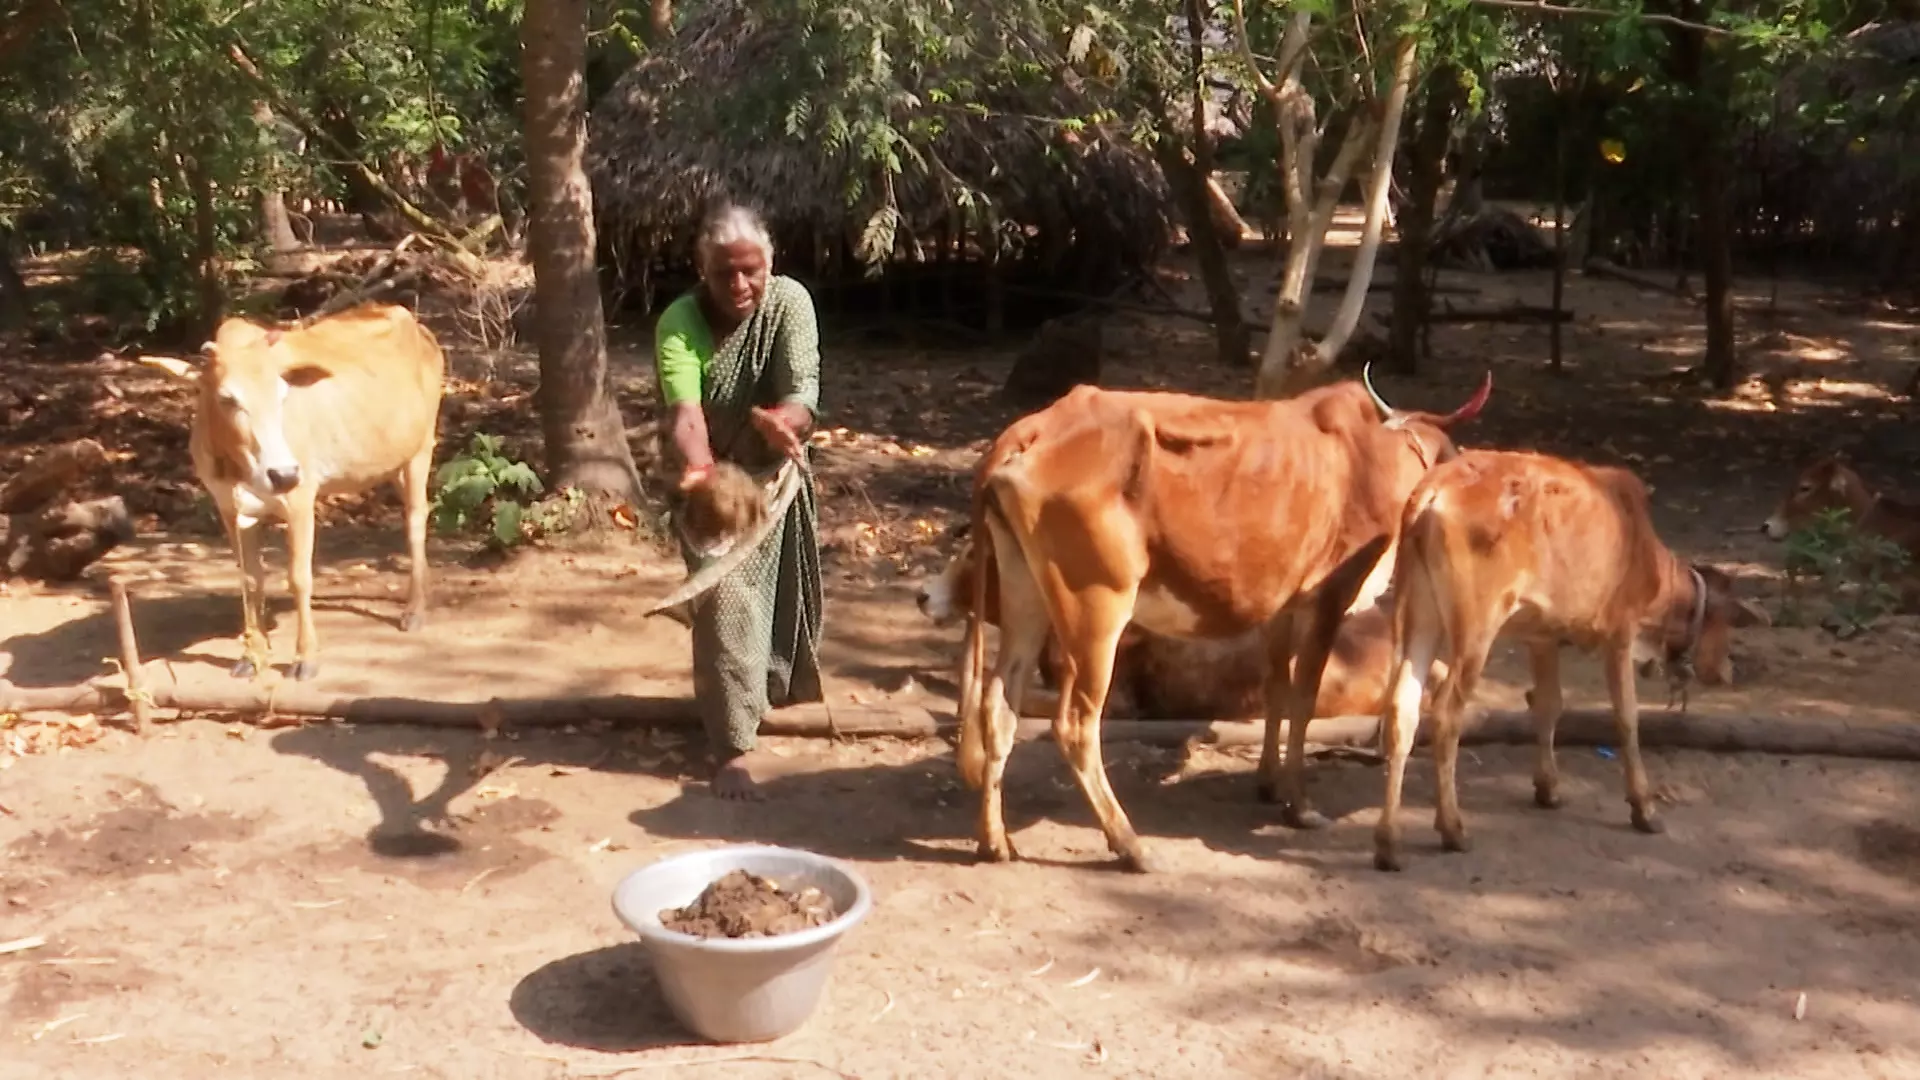 Chandra Natarajan says with lack of education and nobody to support any entrepreneurial activity in the area, grazing cows came as the sole livelihood option.